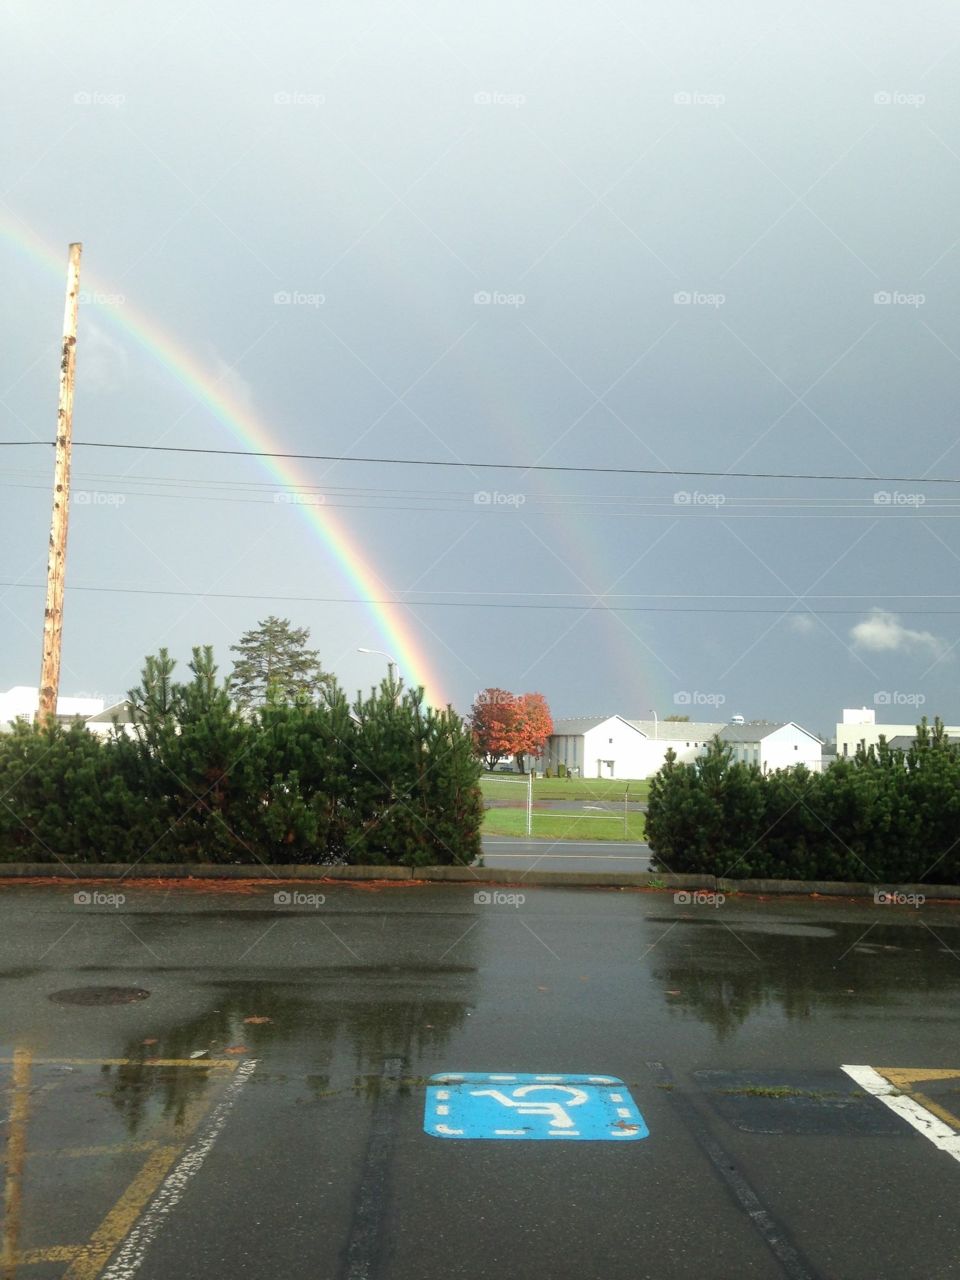 A beautiful double rainbow after a brief spring shower in the Comox Valley